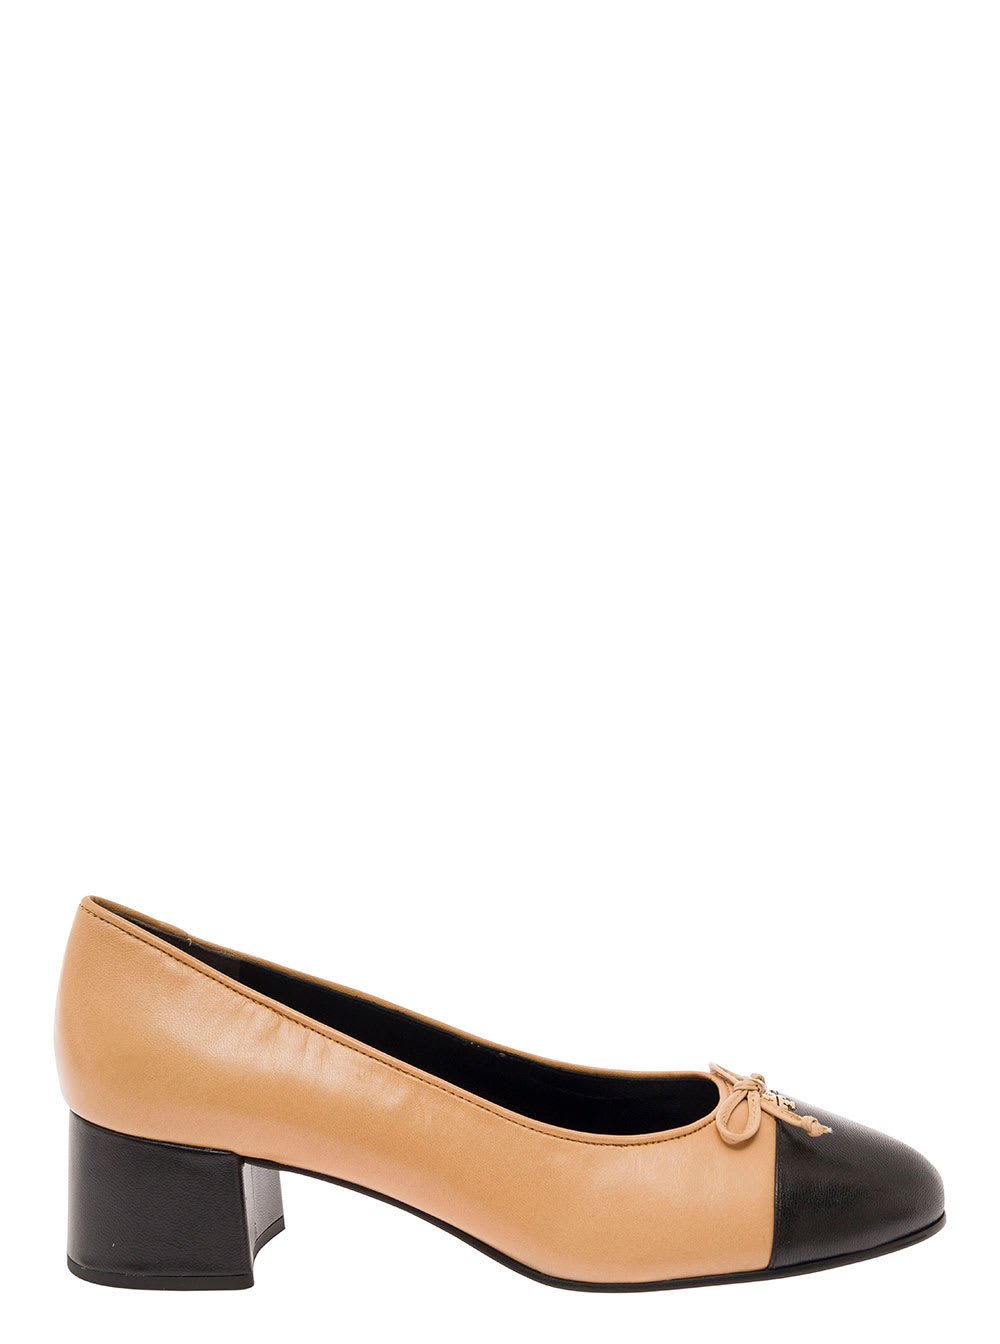 TORY BURCH BEIGE AND BLACK BALLET FLATS WITH BOW DETAIL AND BI-COLOR TOE IN SMOOTH LEATHER WOMAN